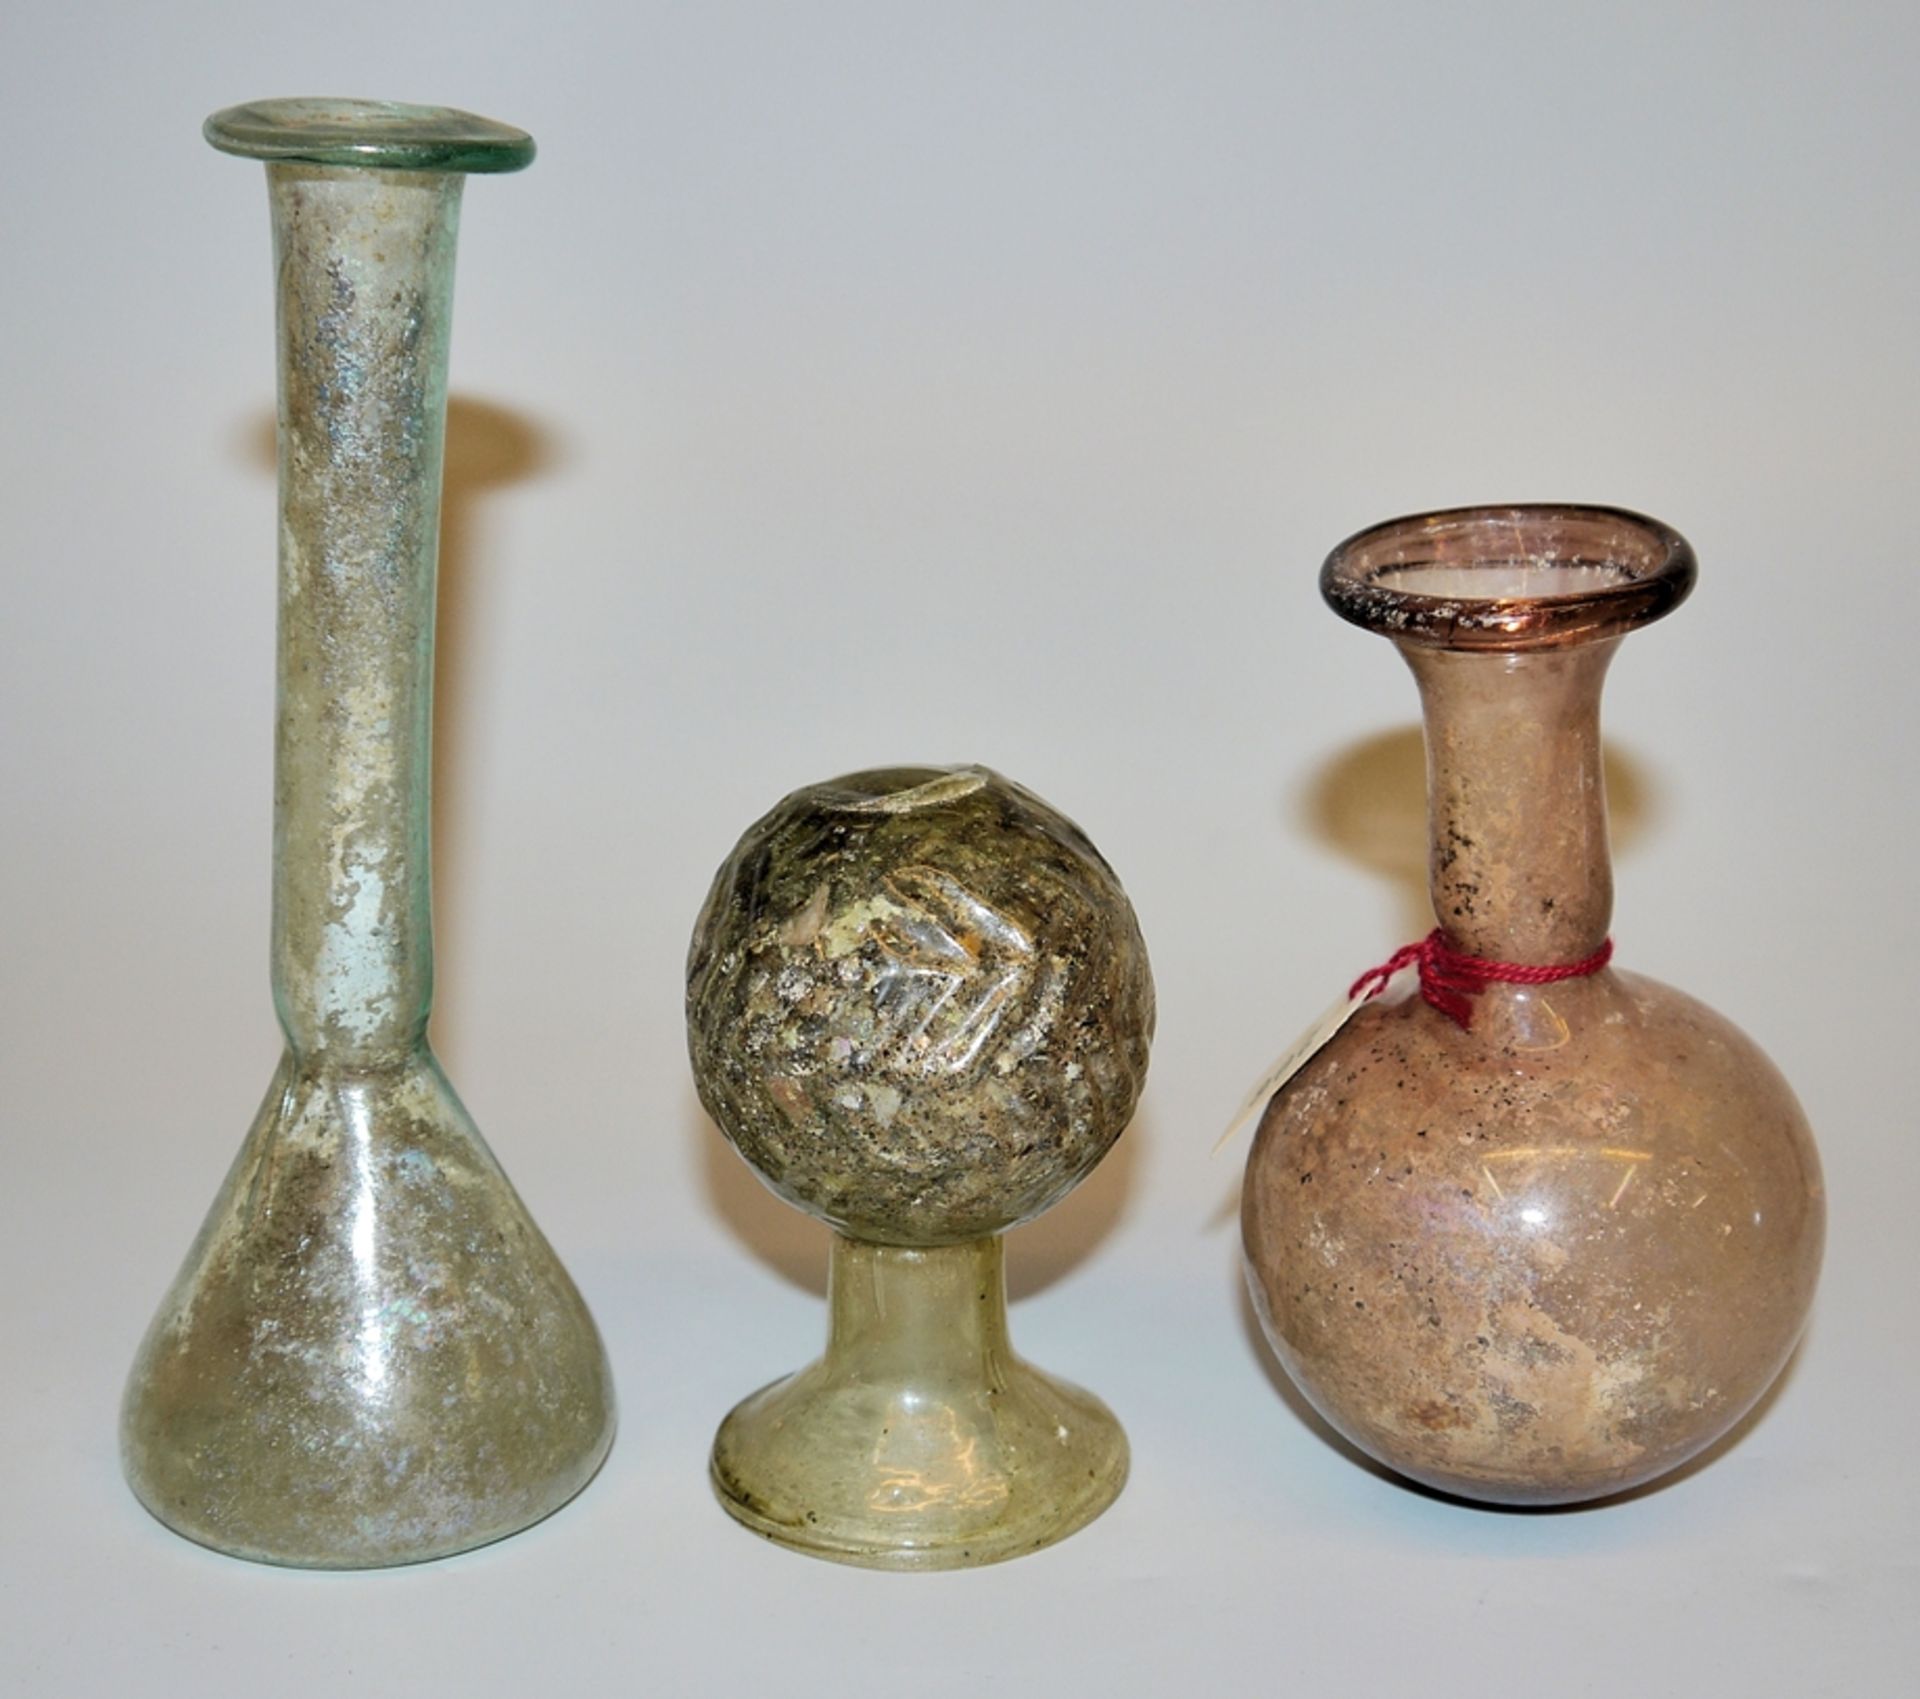 Six Roman jars, 1st-3rd century, from an old collection with family document - Image 2 of 3